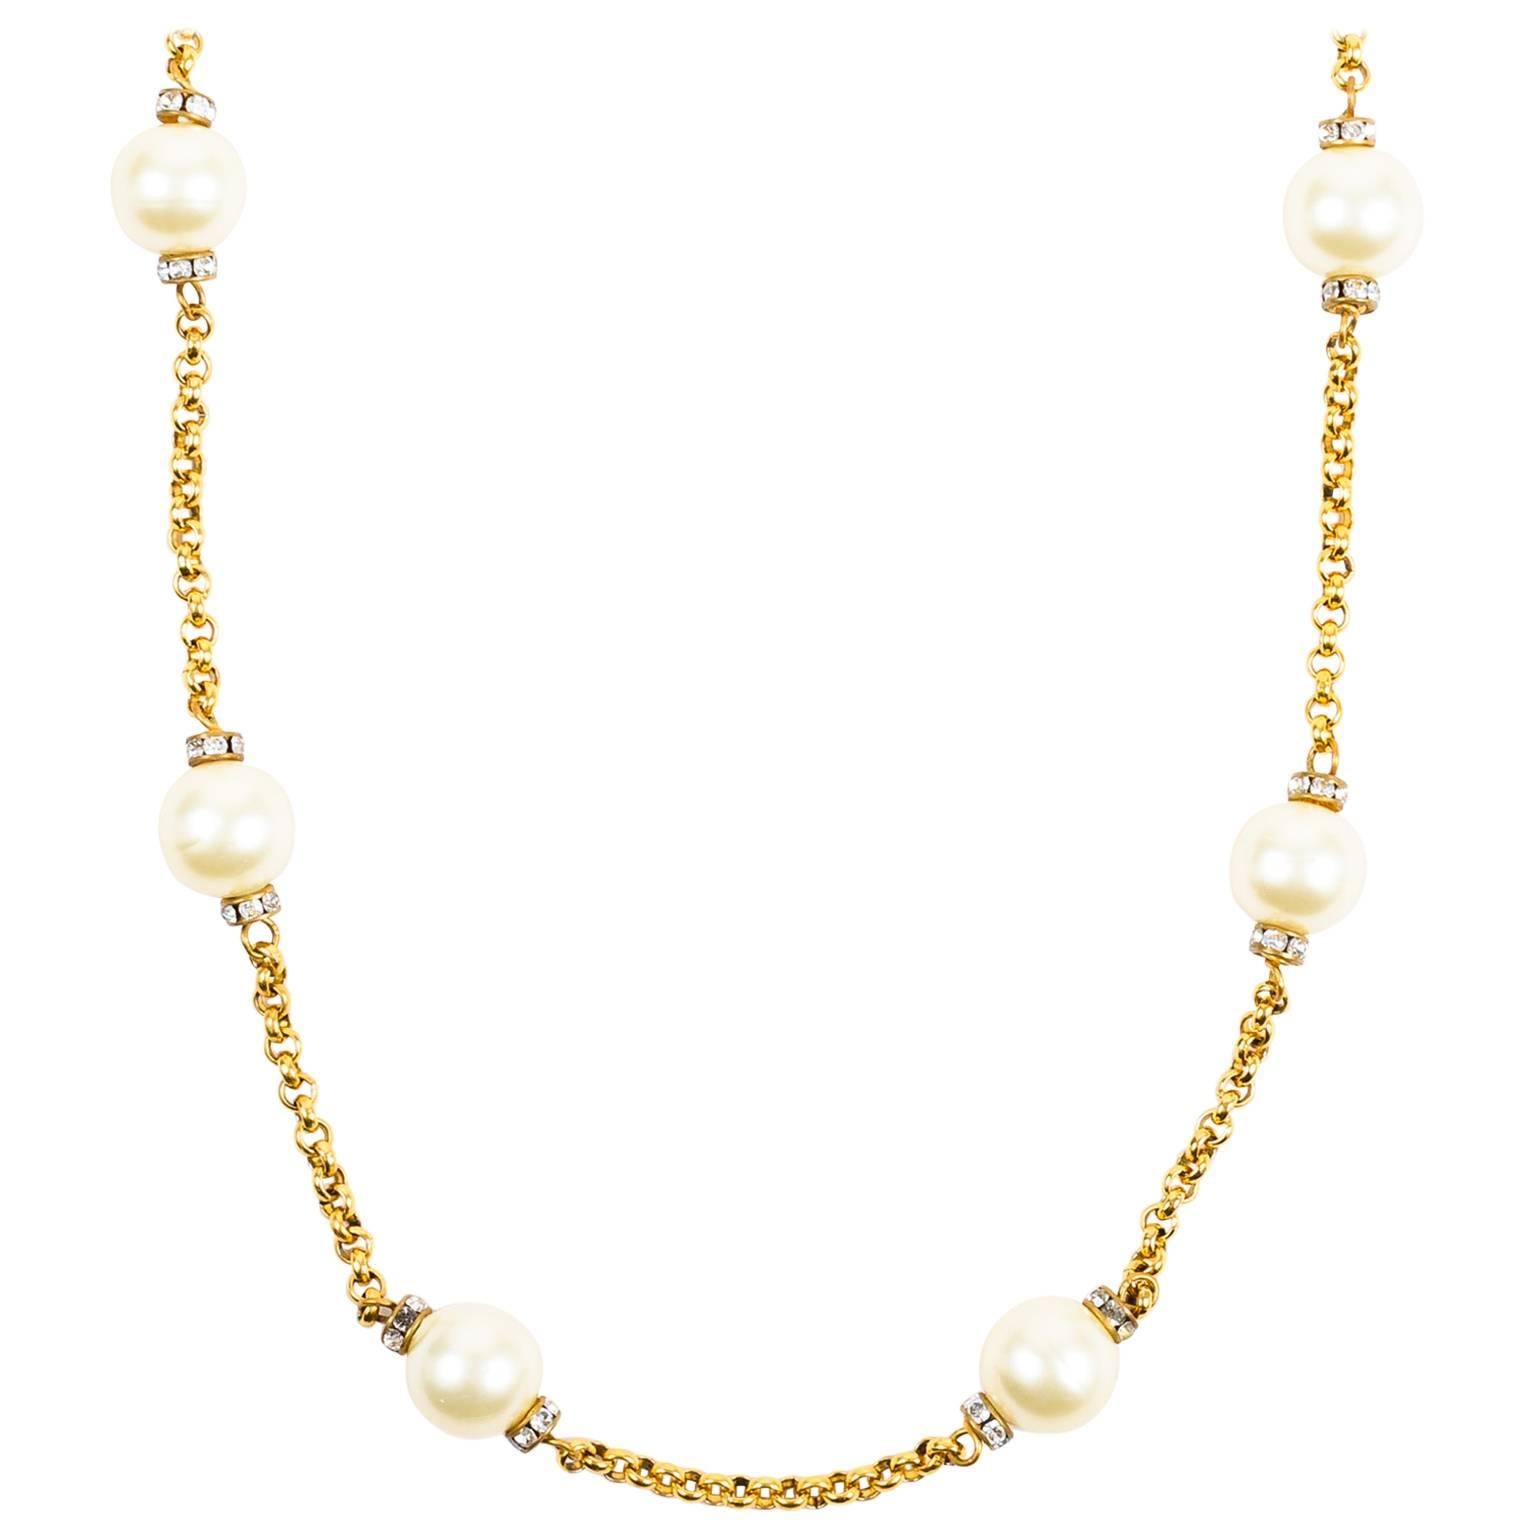 Vintage Chanel Gold Tone Metal Faux Pearl Crystal Strand Necklace For Sale